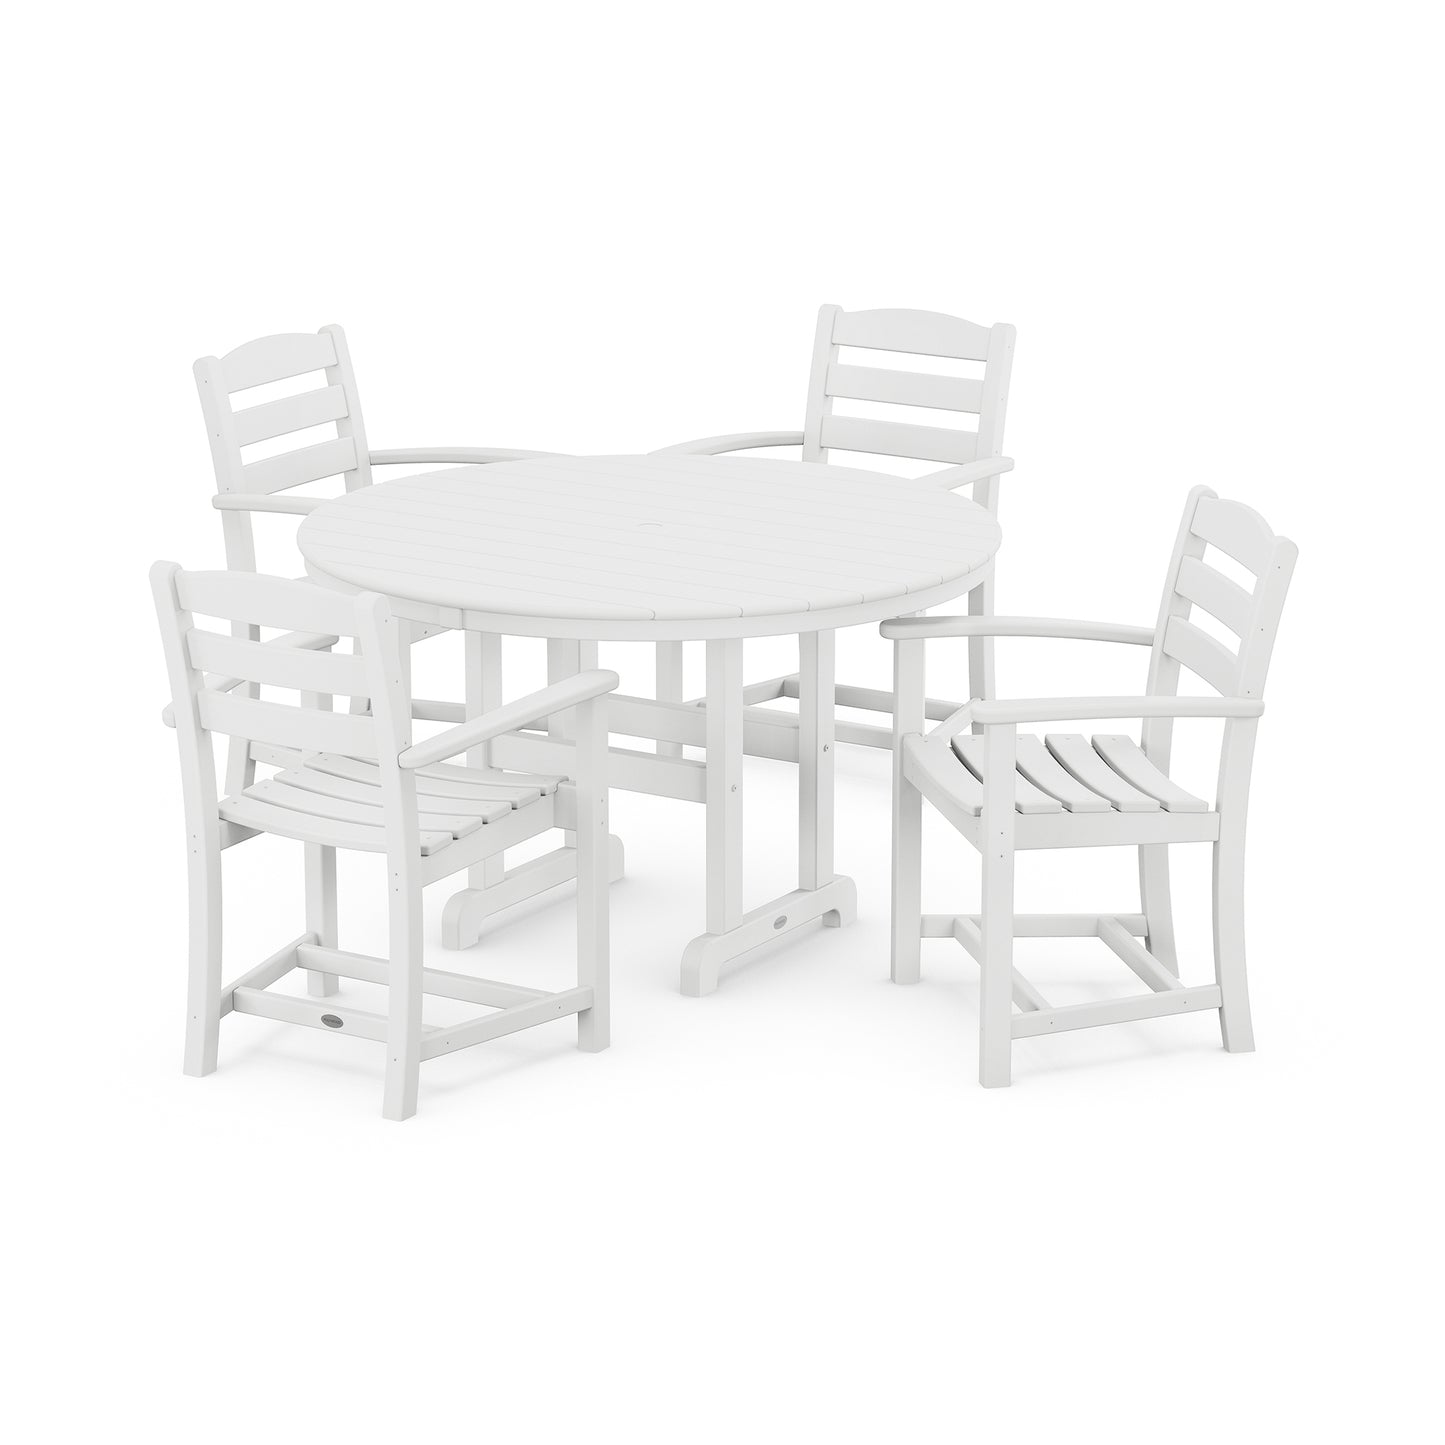 A set of durable white POLYWOOD® La Casa Café 5-Piece Dining Set consisting of one round table and four chairs with vertical slat backs, all displayed against a plain white background.